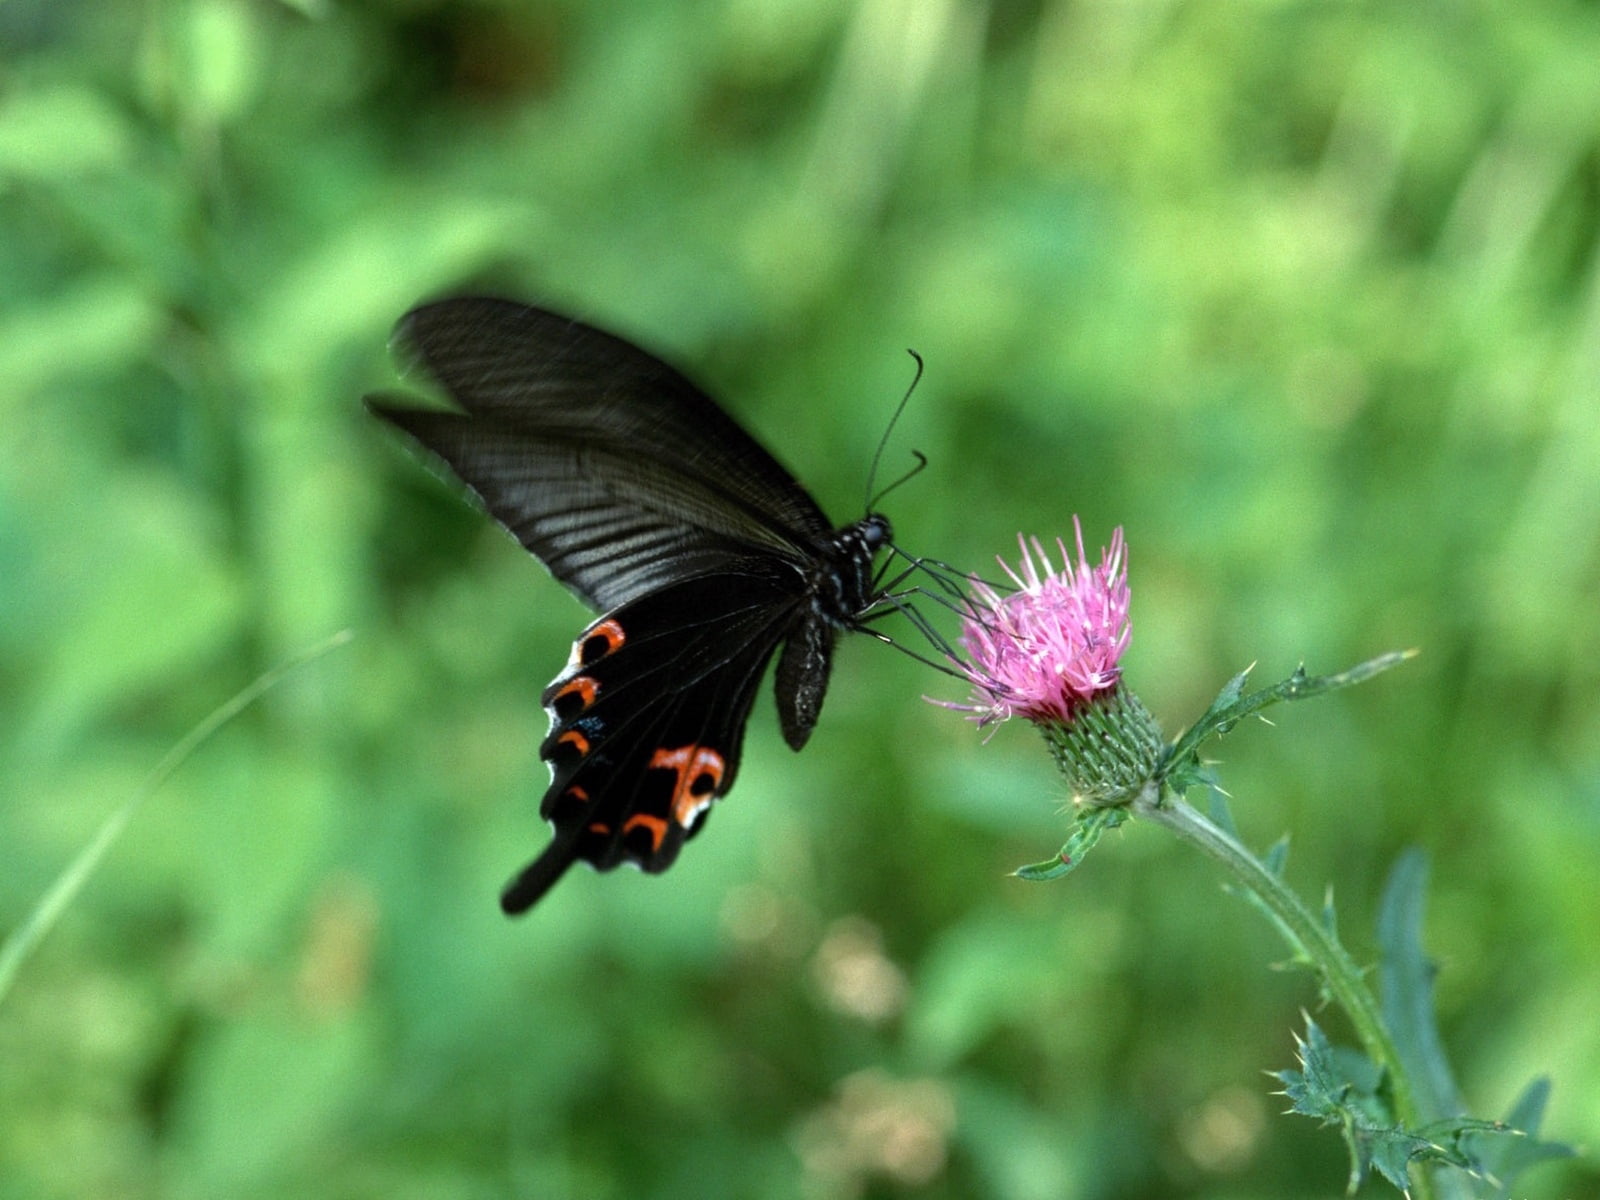 male great mormon butterfly, flower, swing, insect, nature, butterfly - Insect